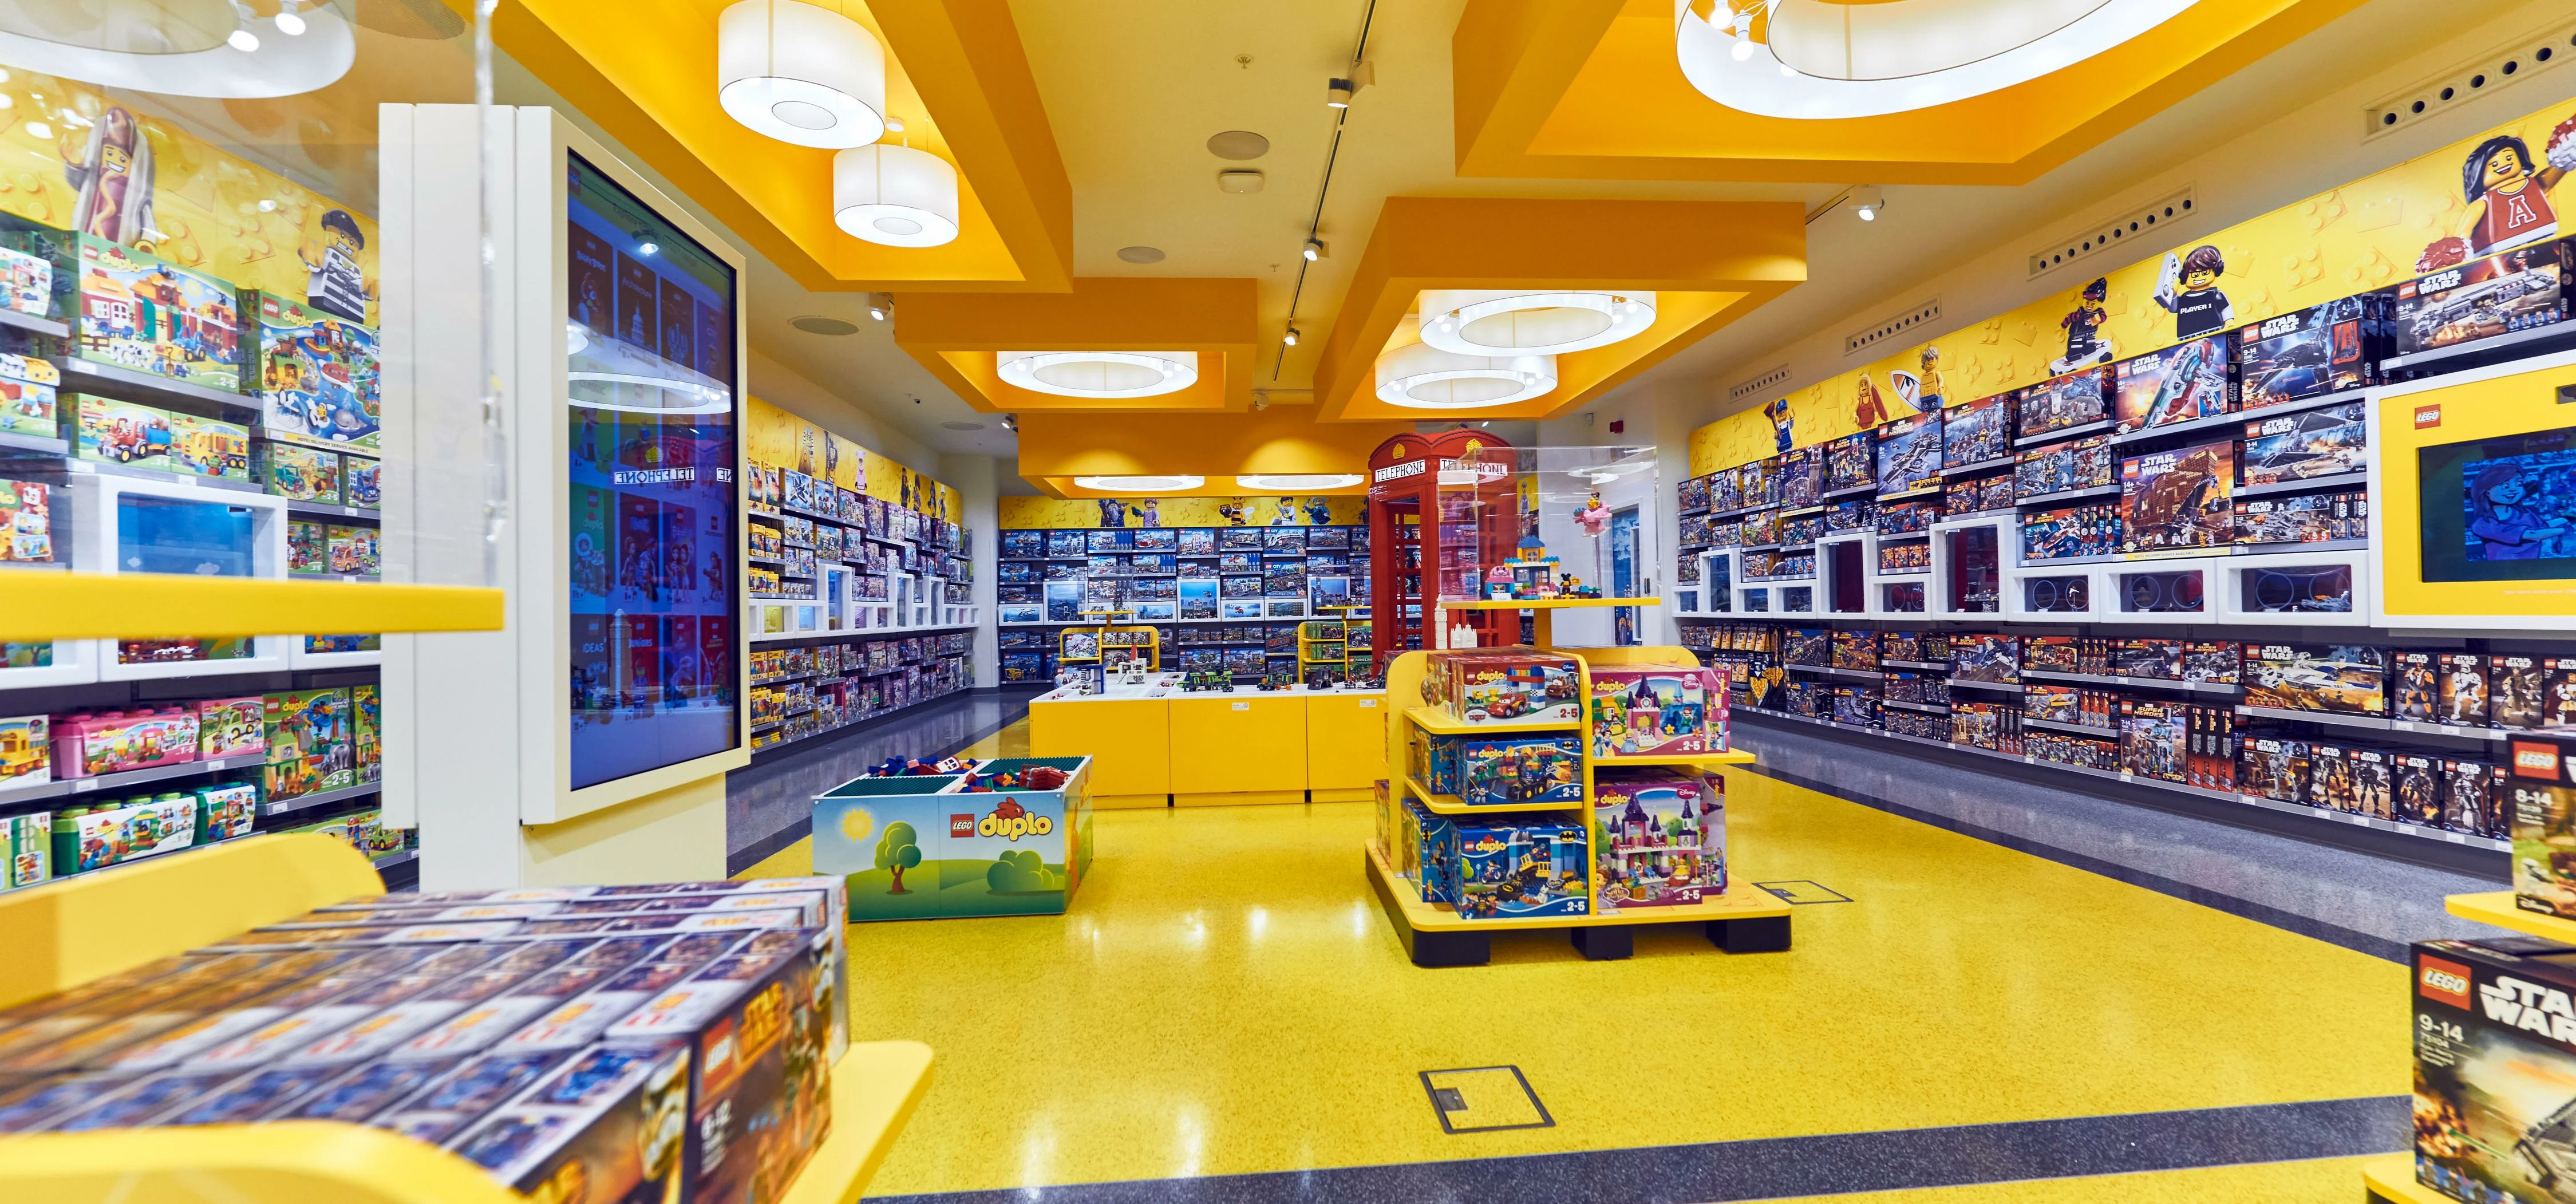 The world’s biggest LEGO store is now open for business in Leicester Square. 